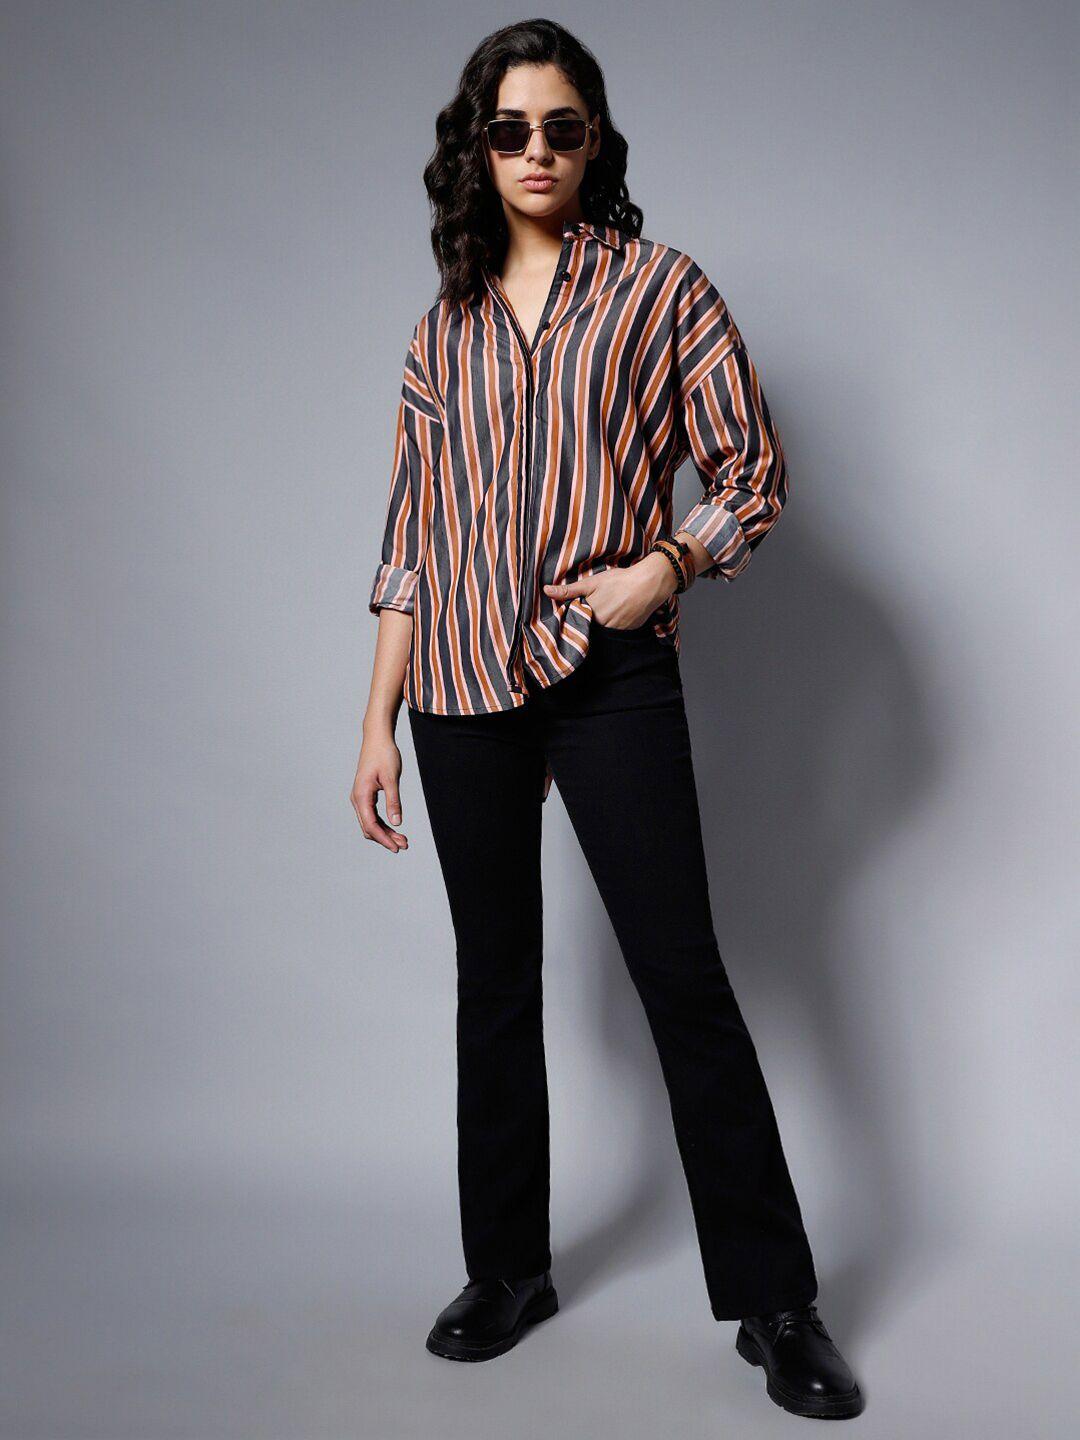 high-star-classic-striped-spread-collar-boxy-fit-pure-cotton-casual-shirt